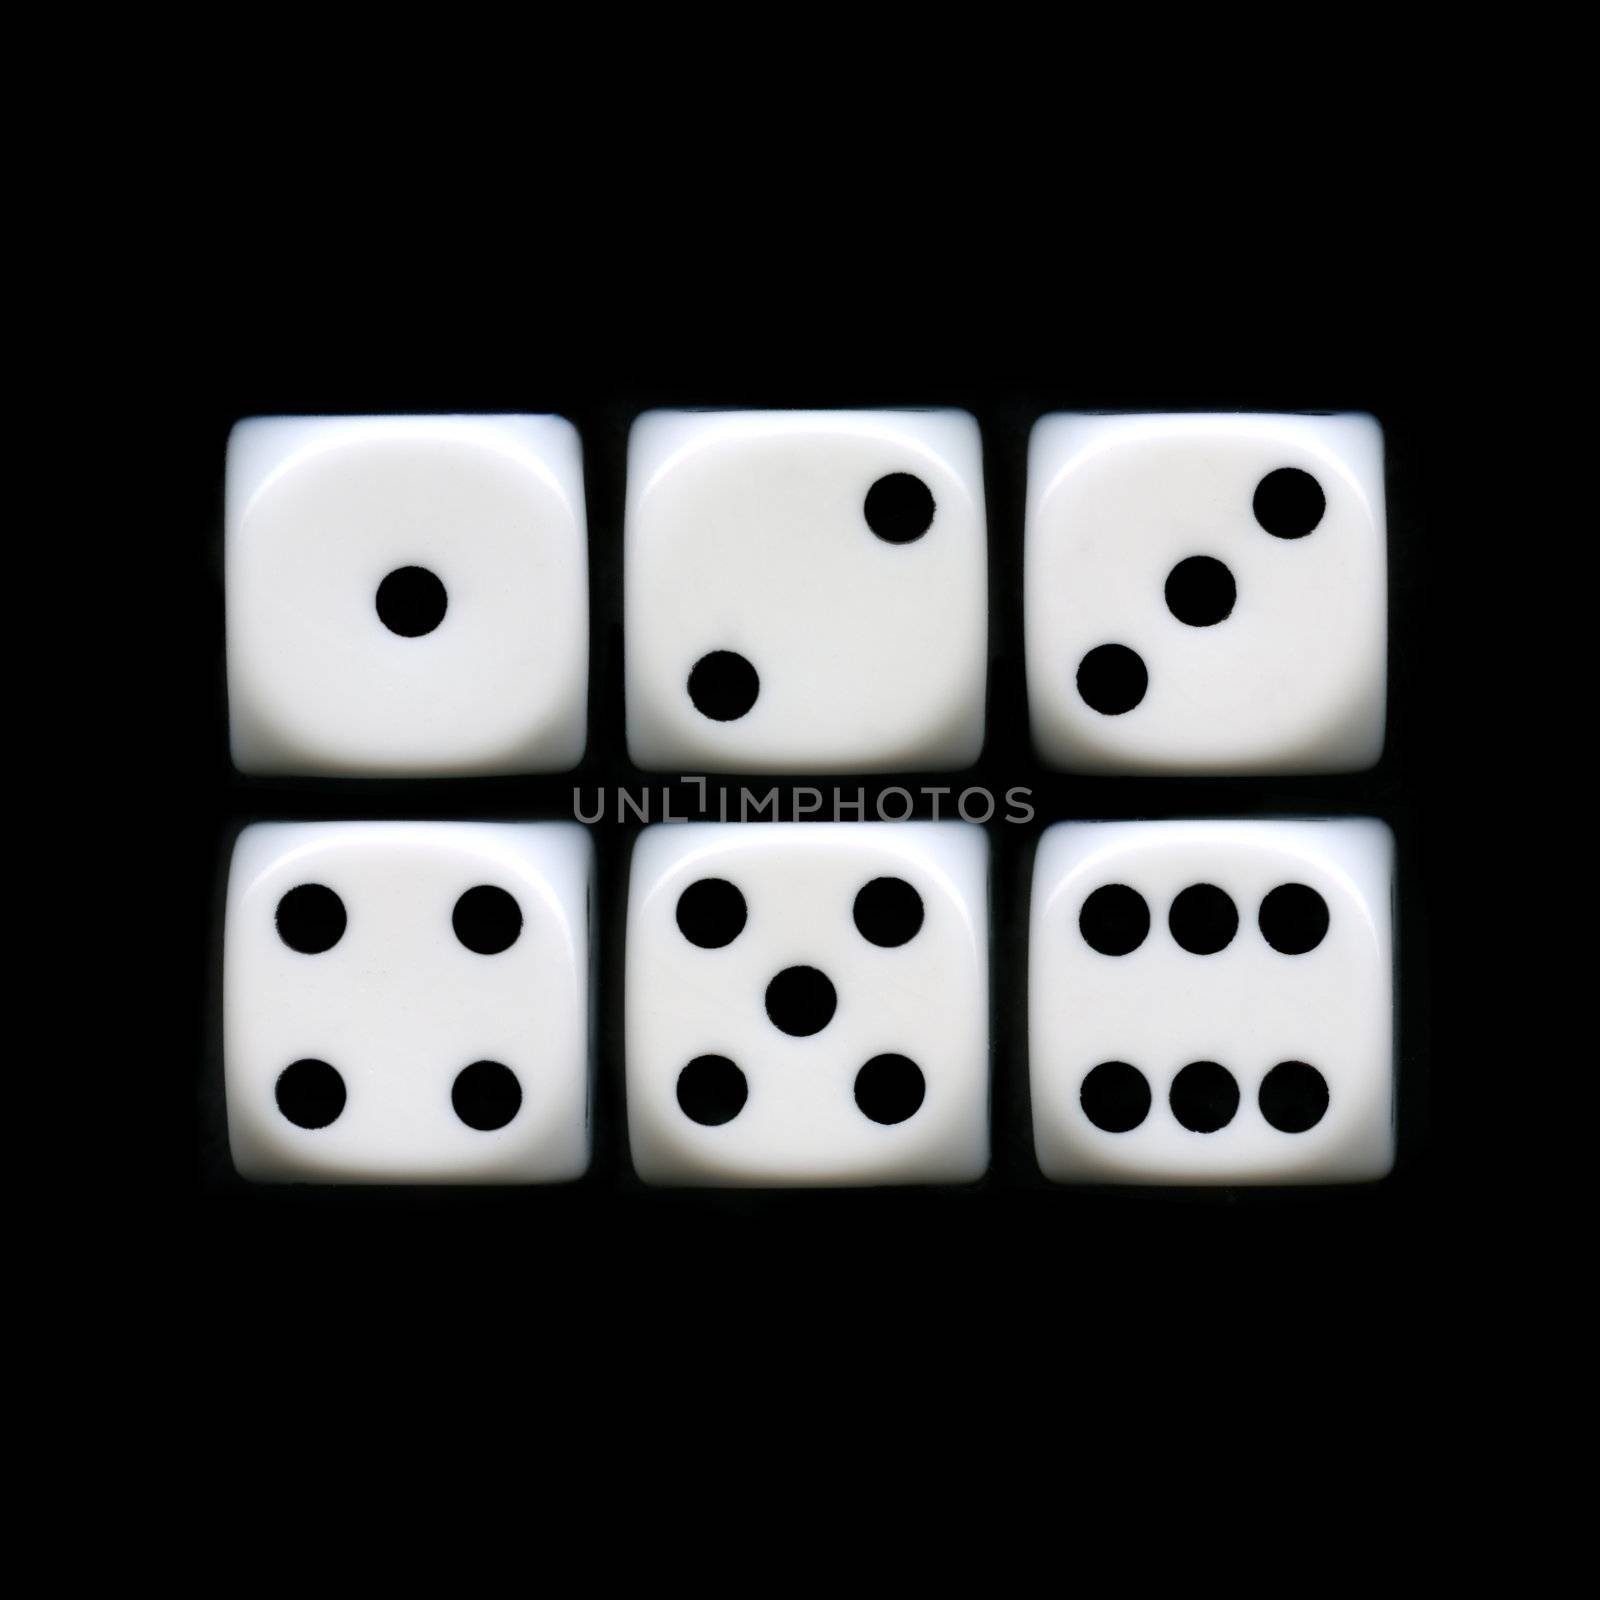 The six sides of a Dice on a black background.